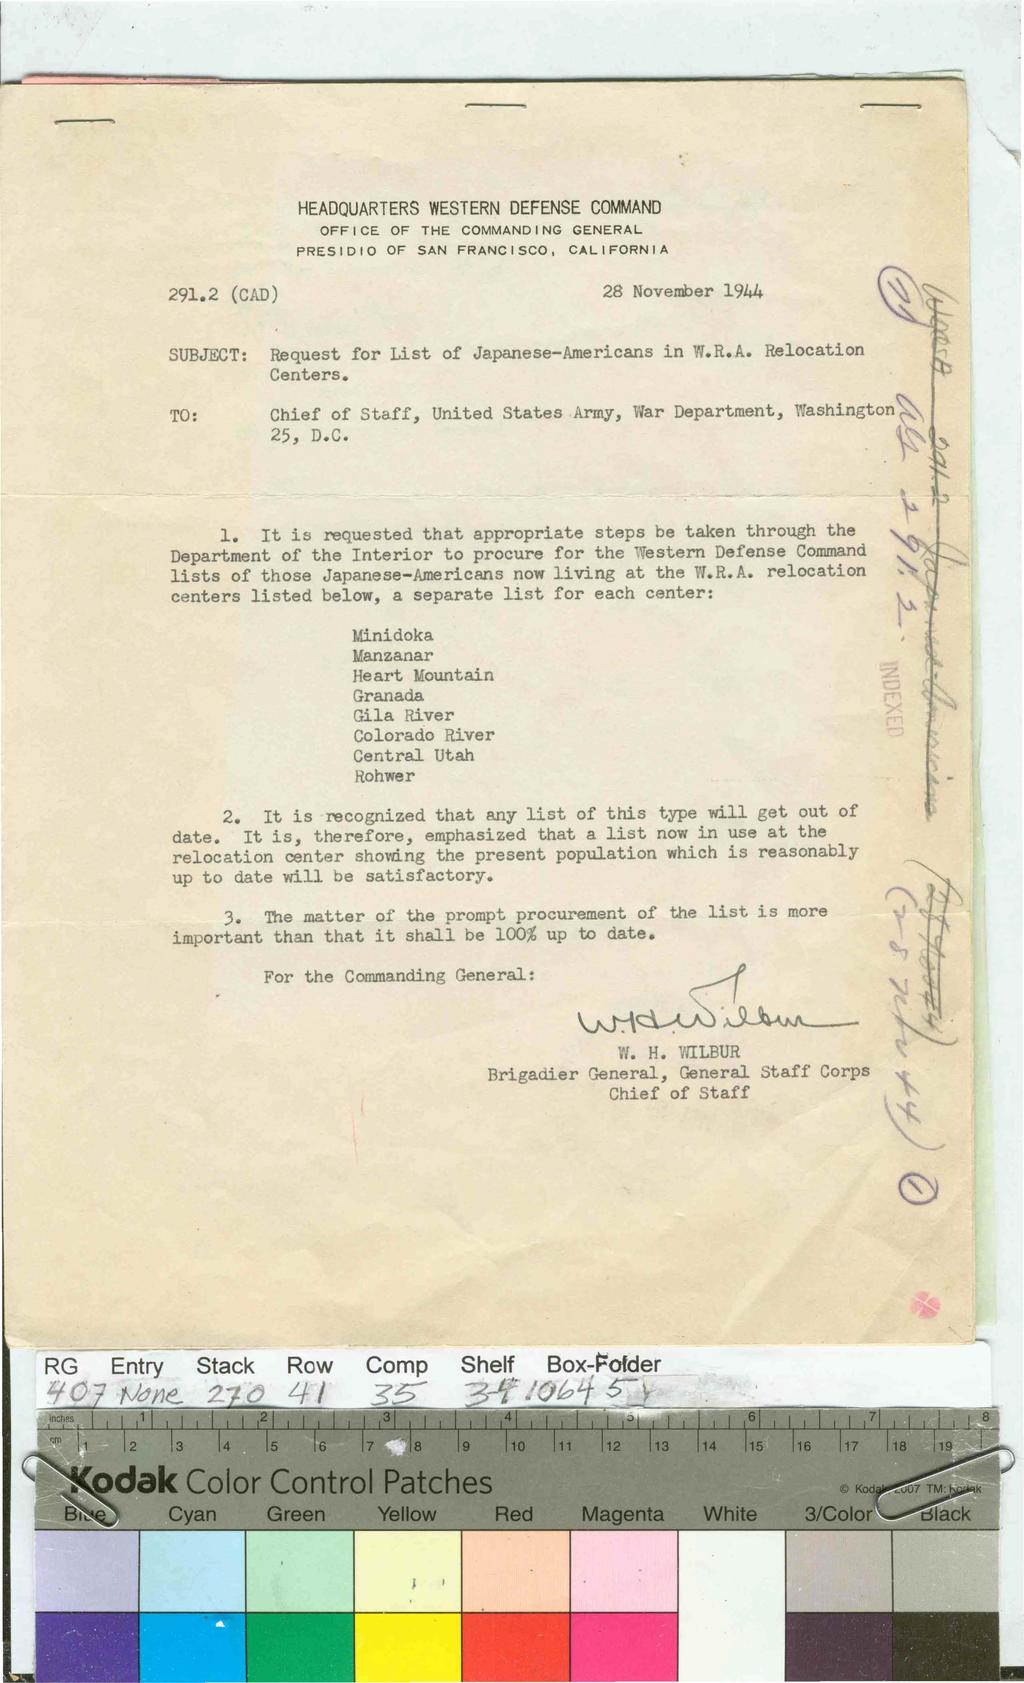 HEADQUARTERS WESTERN DEFENSE COMMAND OFFICE OF THE COMMANDING GENERAL PRES I D IO OF SAN FRANCISCO, CALIFORNIA 291.2 (CAD) 28 November 1944 SUBJECT: TO: Request for List of Japanese-Americans in W.R.A. Relocation Centers.